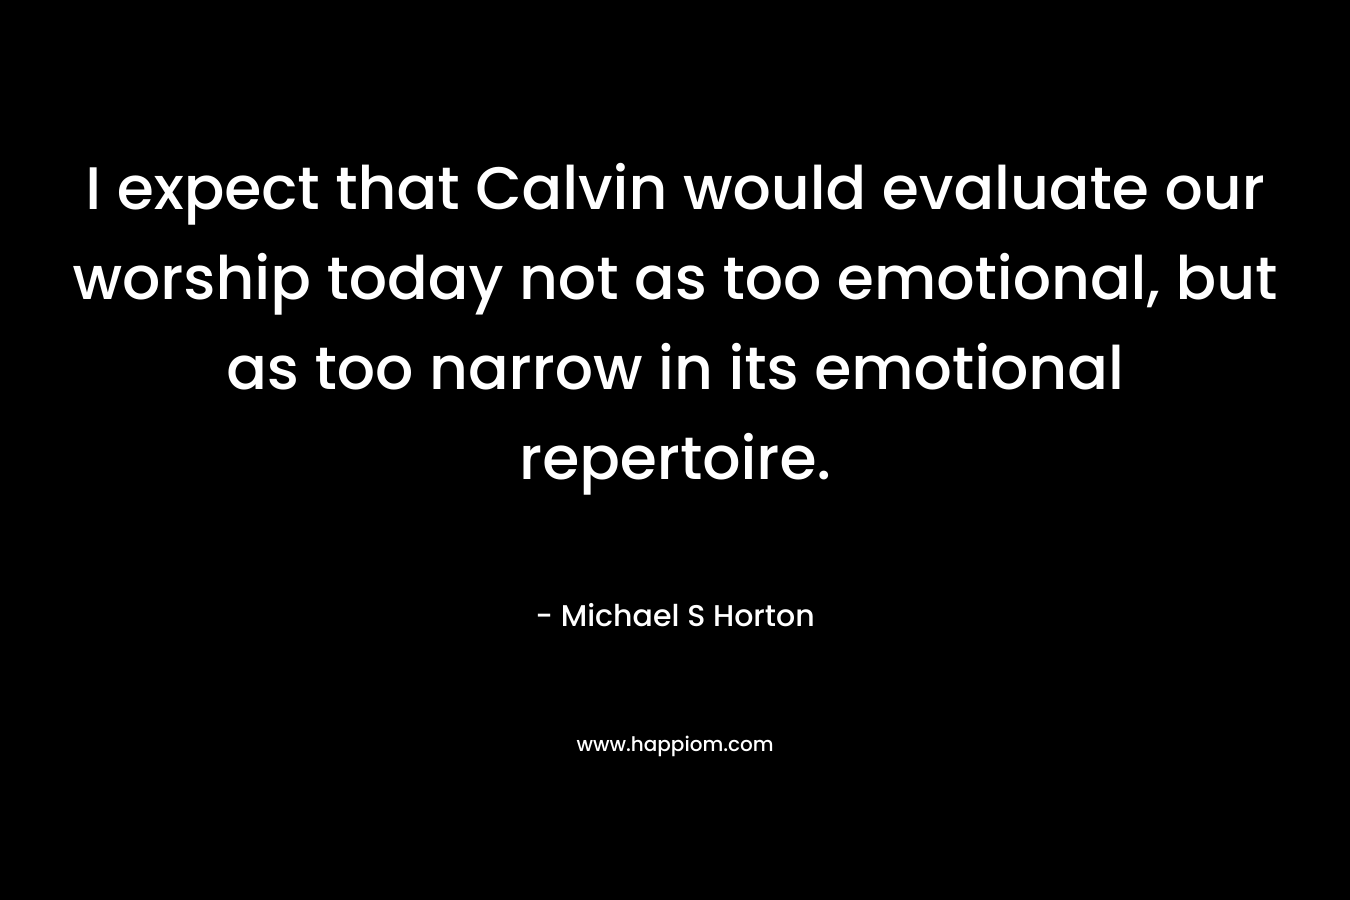 I expect that Calvin would evaluate our worship today not as too emotional, but as too narrow in its emotional repertoire.